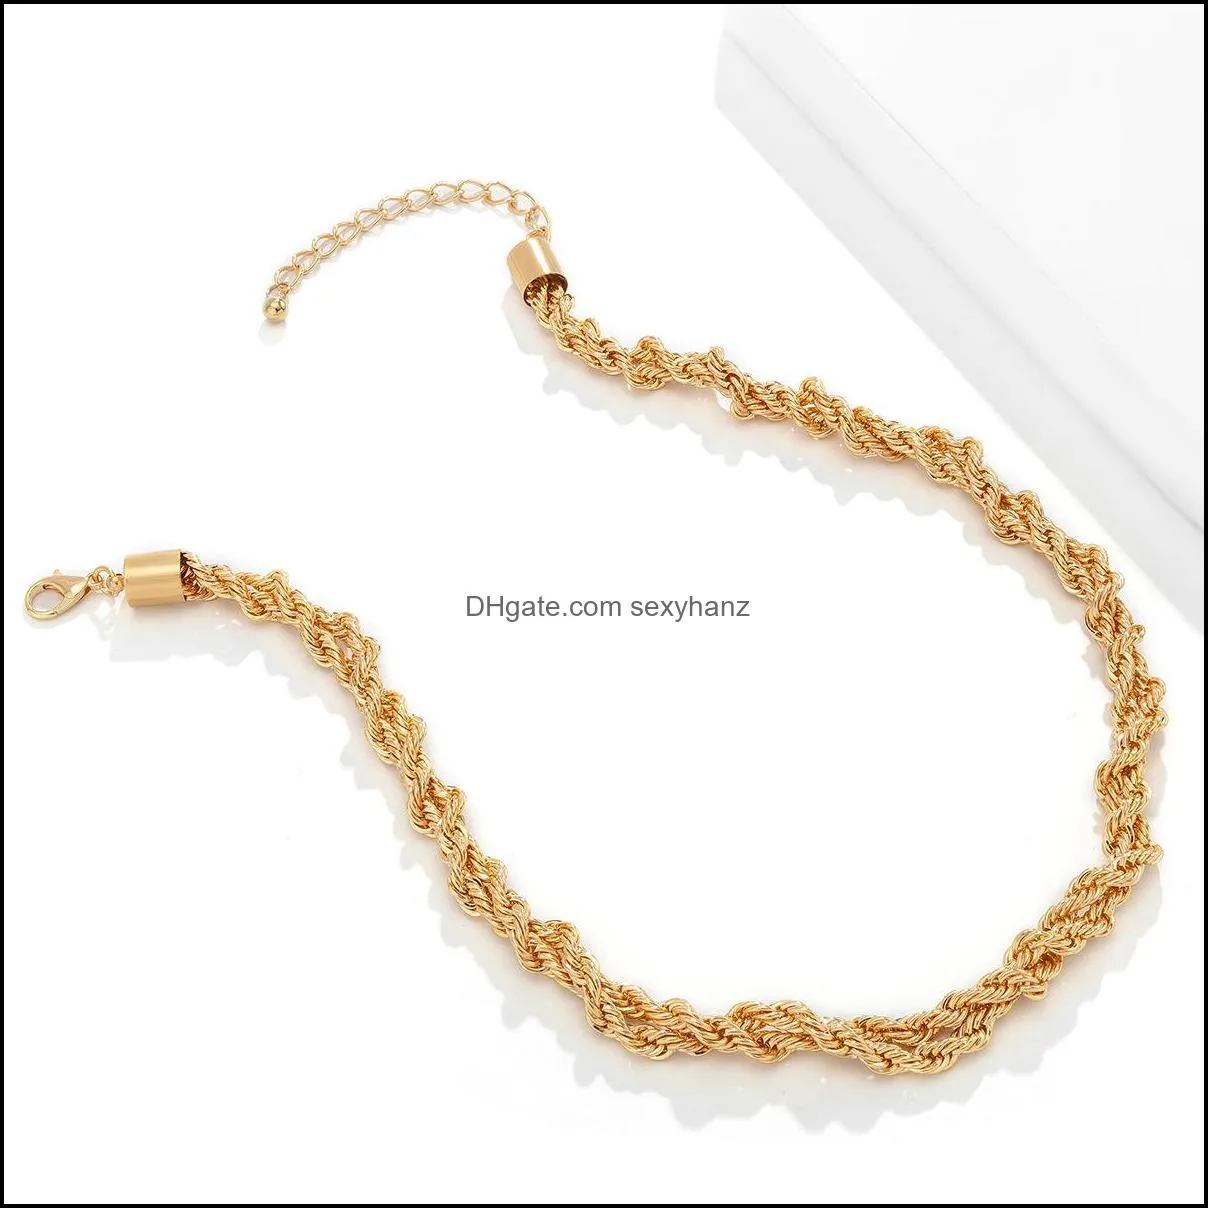 Metal Twist Chains Necklaces Retro Fashion Punk Cold Wind Simple Short Chain Clavicle necklace Hip-hop Cuban Temperament Style Light Luxury Snake Bone Jewelry